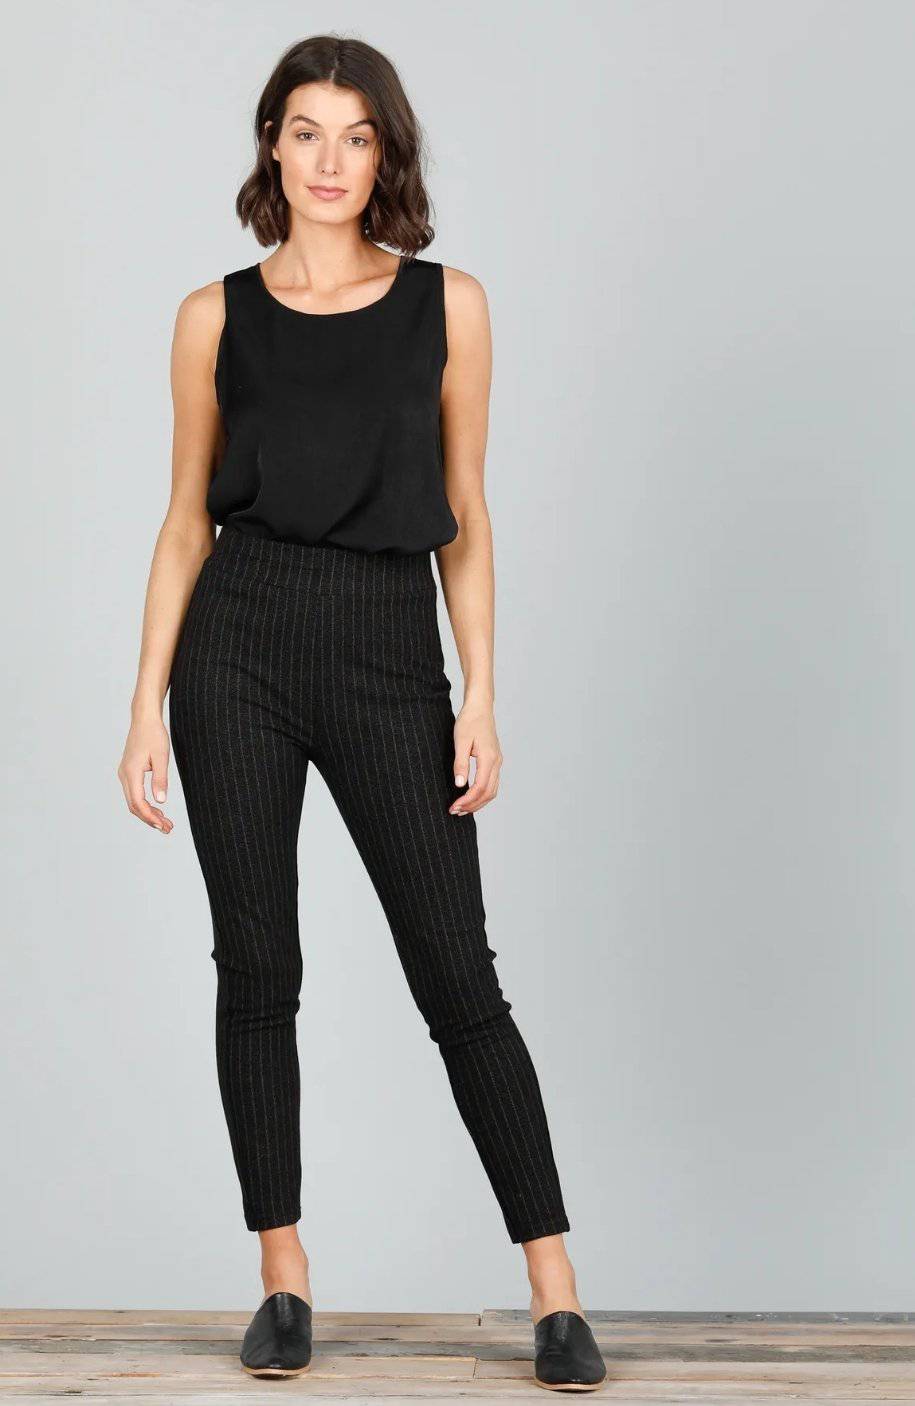 Black Pants For Winter Thick Quality Fabric Black With Pinstrips. - Tracey Glynn Fashions